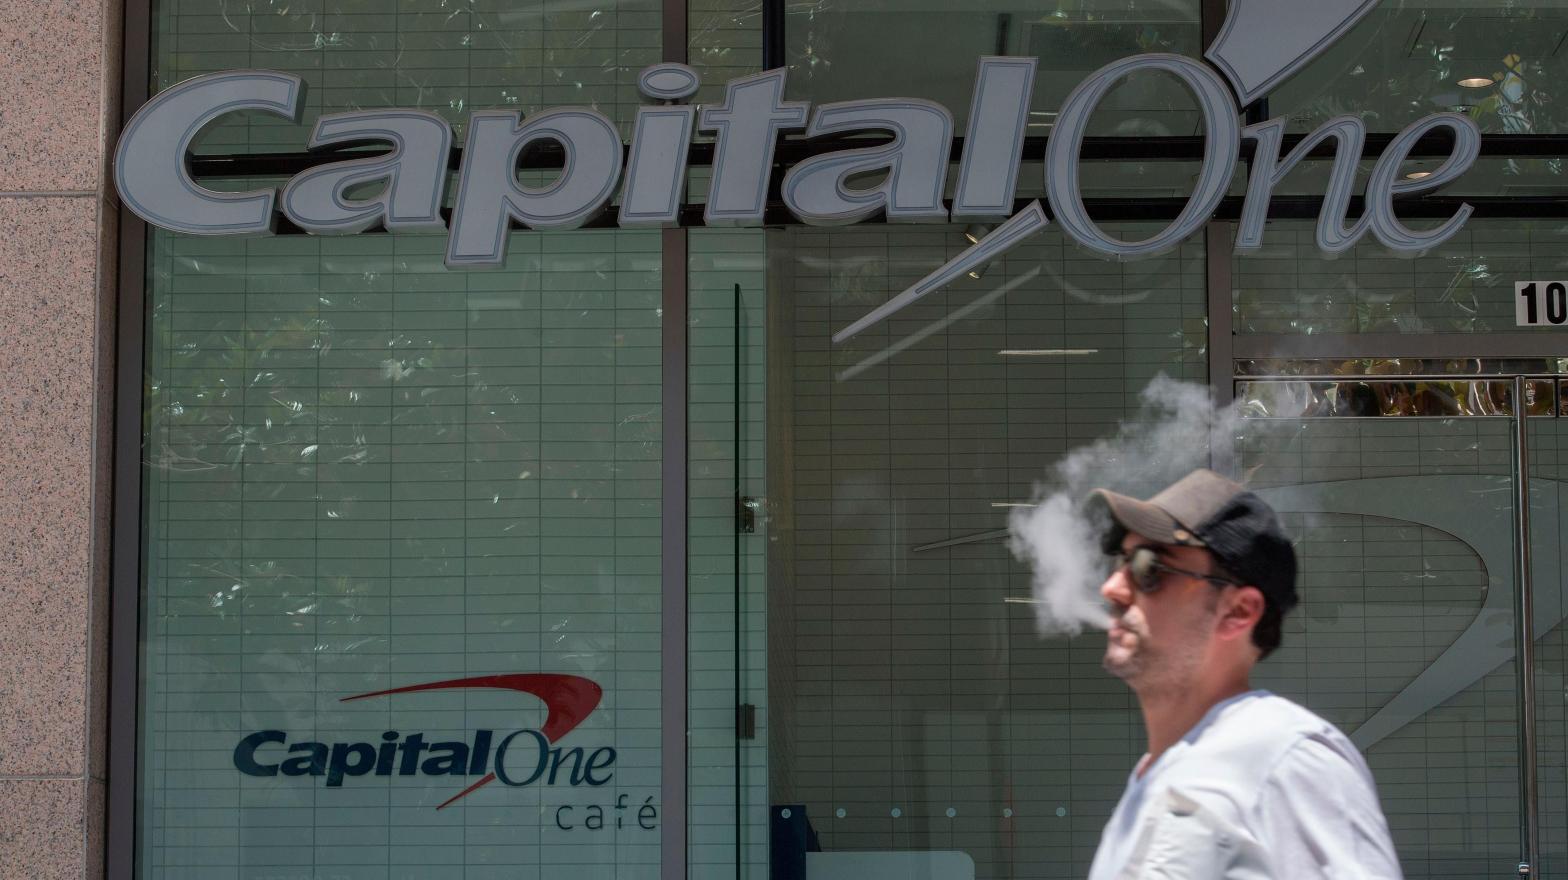 Capital One has been investigated by an arm of the U.S. Department of the Treasury for its allegedly lax security measures prior to the massive 2019 hack. (Photo: MARK RALSTON/AFP, Getty Images)